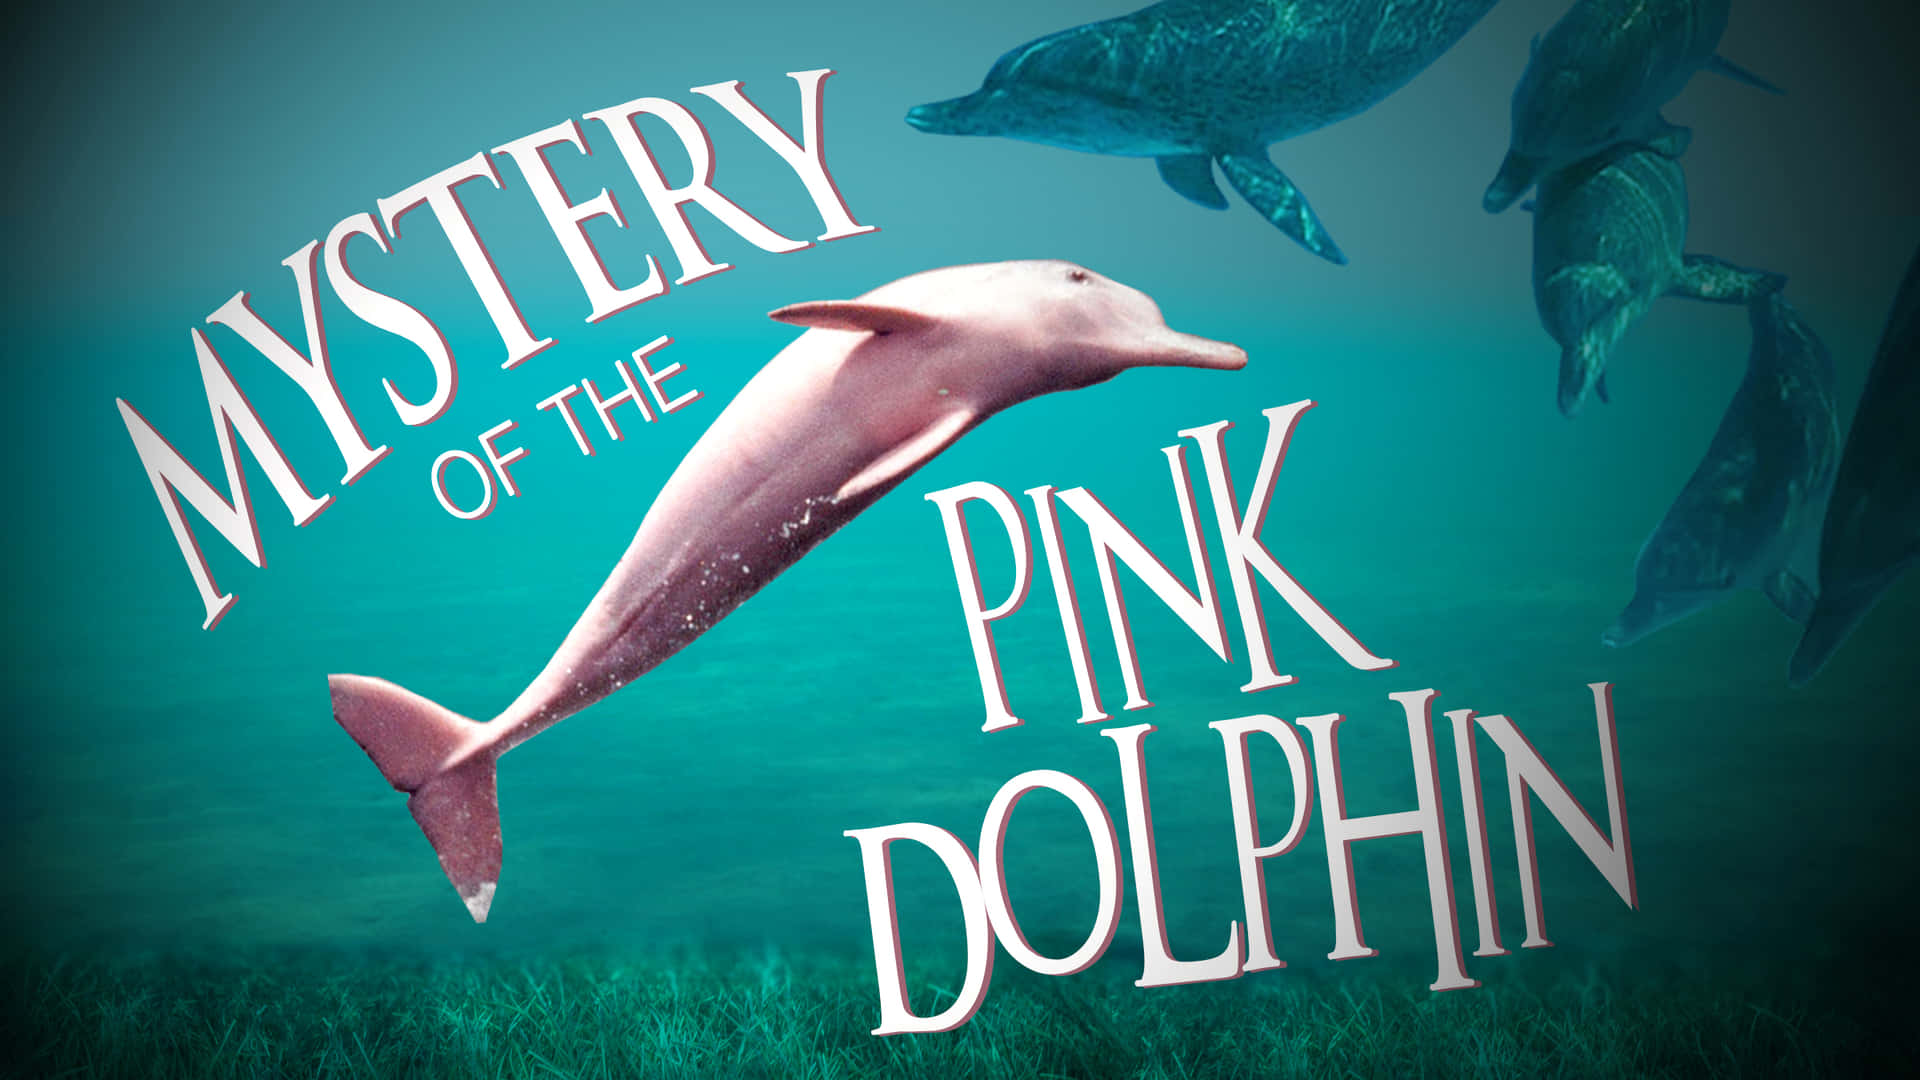 Image A Pink Dolphin Swimming In An Ocean.